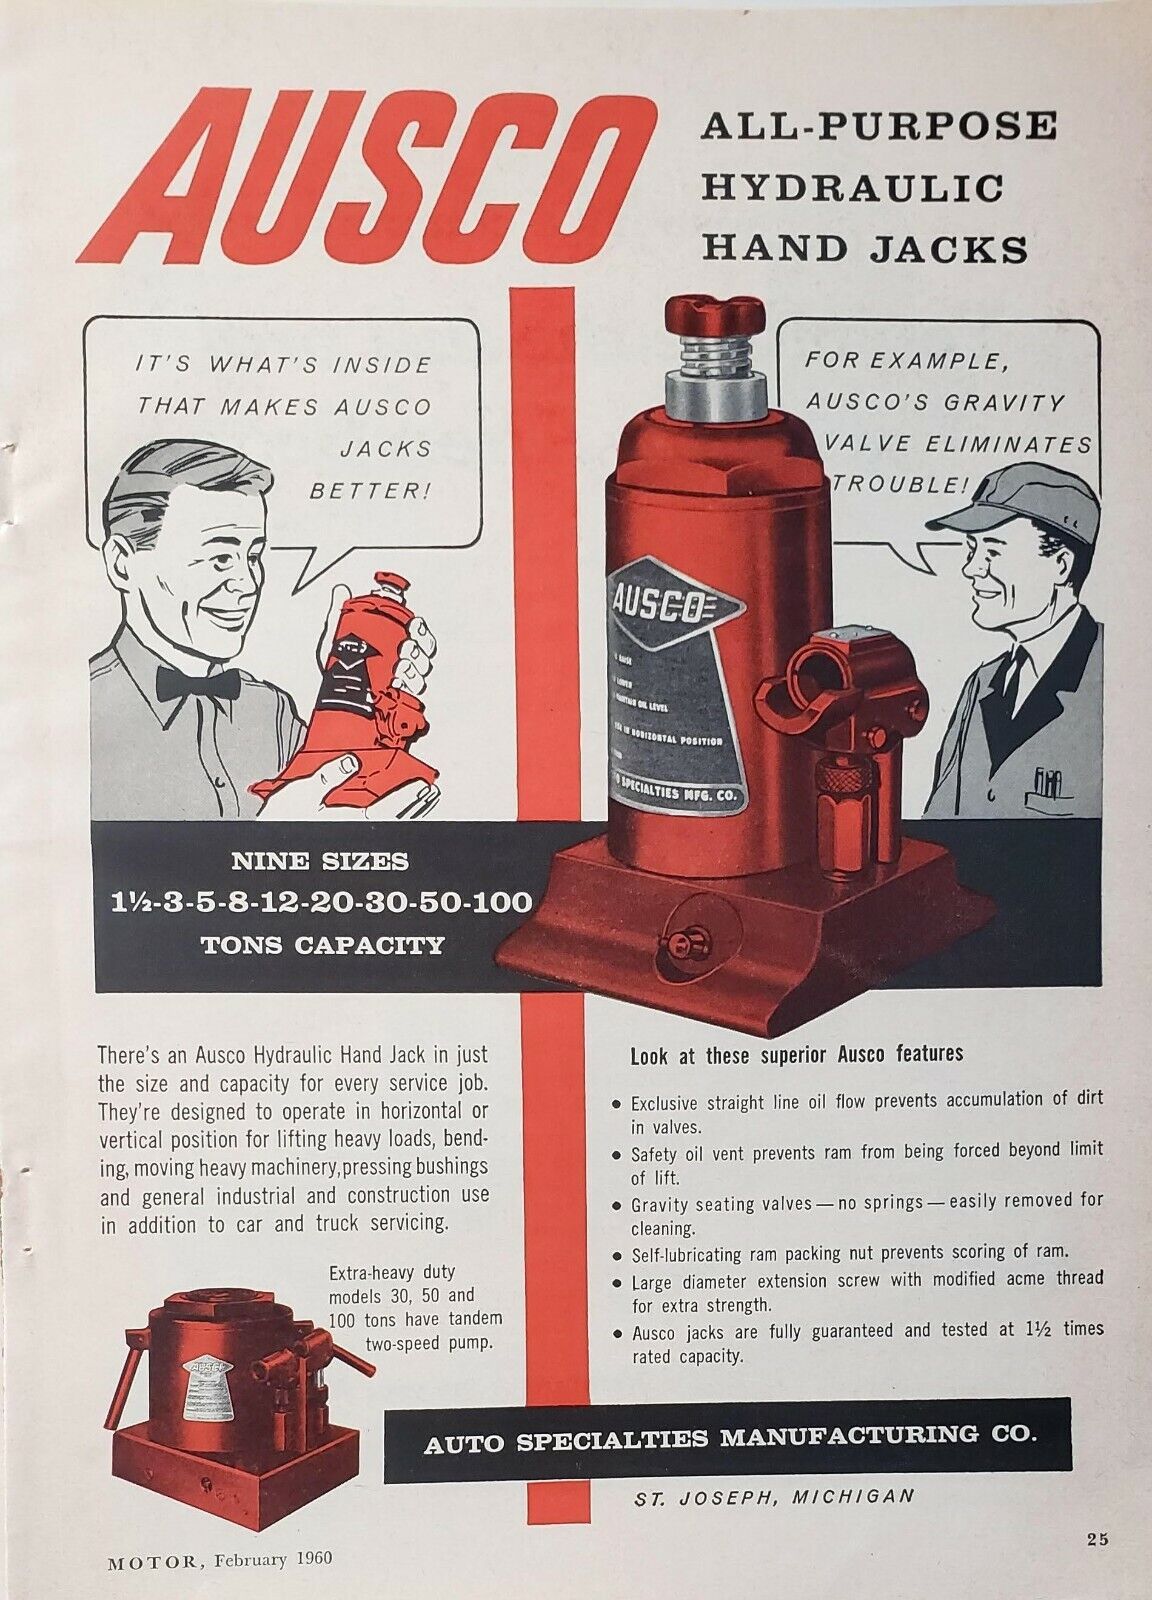 Lot of 3 Vintage AUSCO Hydraulic Hand One End Lift Jack  Print Ads